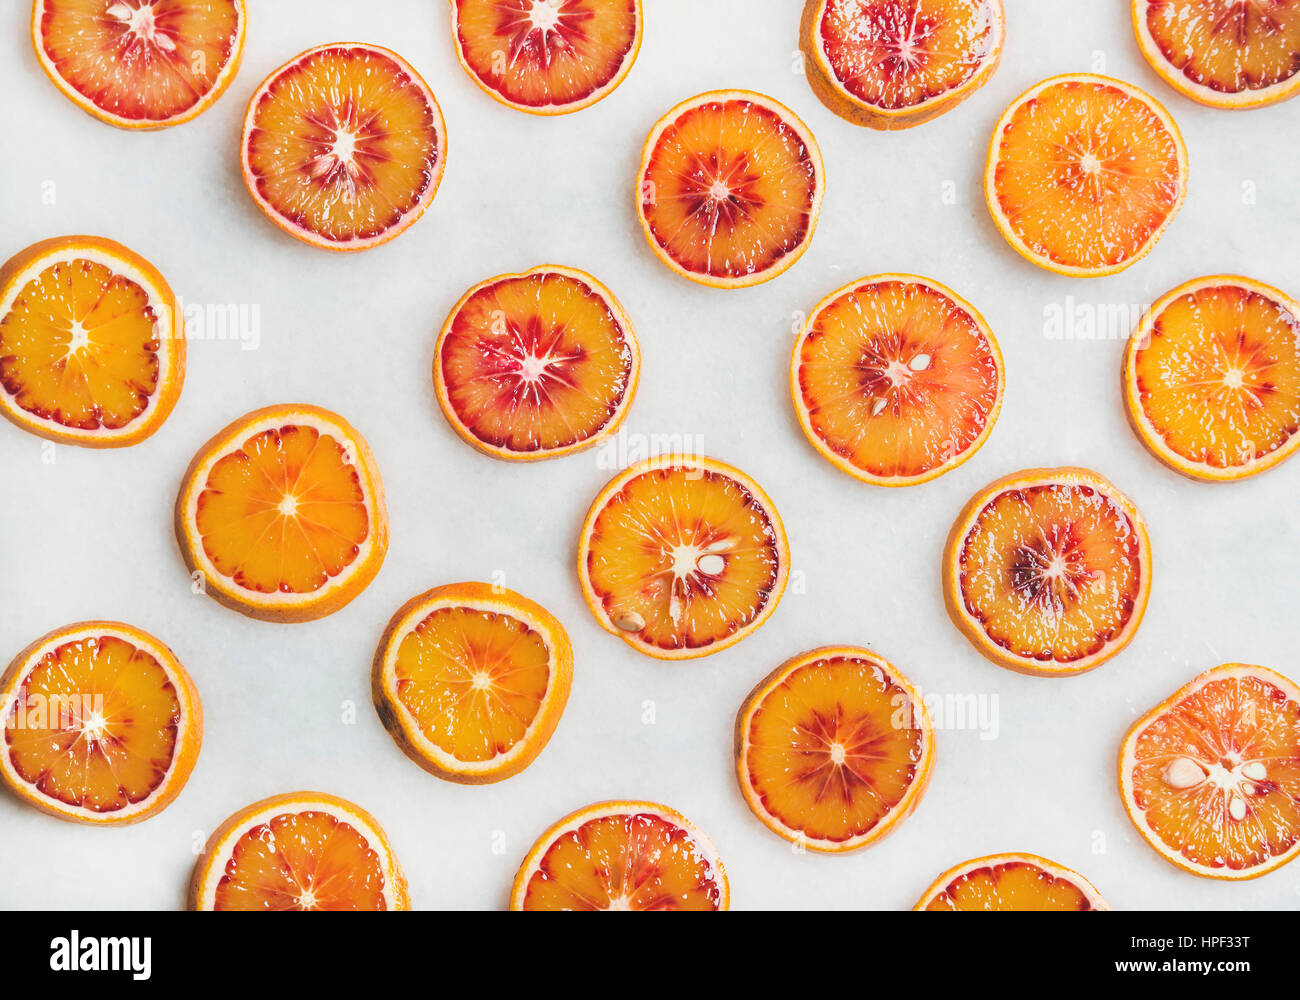 Natural fruit pattern concept. Fresh juicy blood orange slices over light marble table background, top view Stock Photo